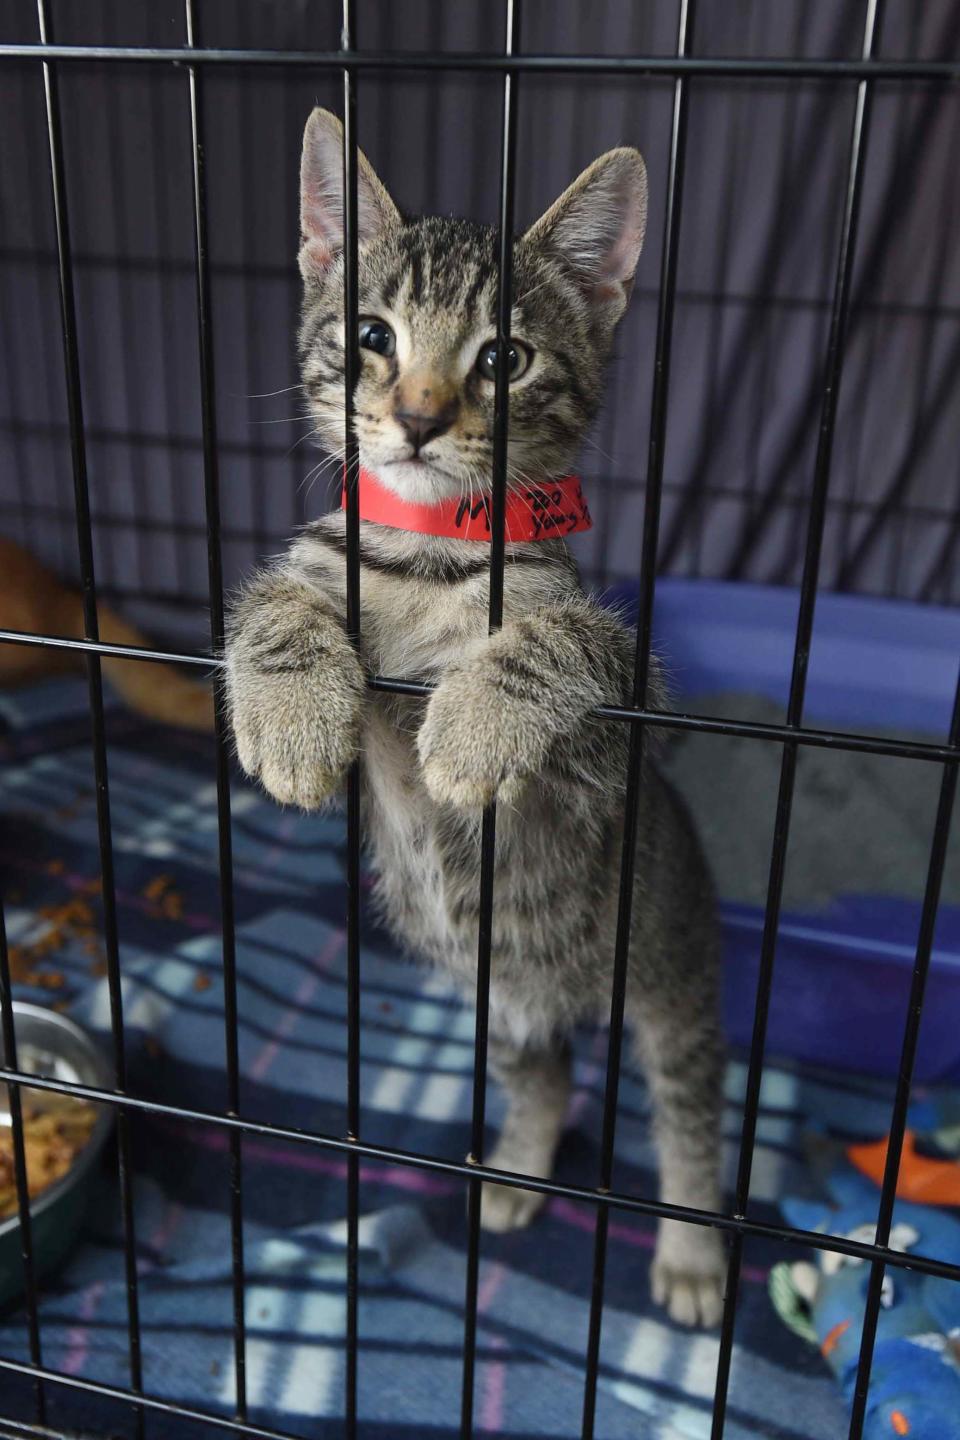 Booga Boo, a young male kitten, stands in a cage at the Panhandle Animal Welfare Society on Friday shortly before he and 138 other cats and 42 dogs were taken to shelters and rescue groups in Kentucky. The New York-based group Guardians of Rescue helped PAWS transfer the animals to make room for animals expected to arrive from neighboring areas hard hit by Hurricane Sally in 2020.